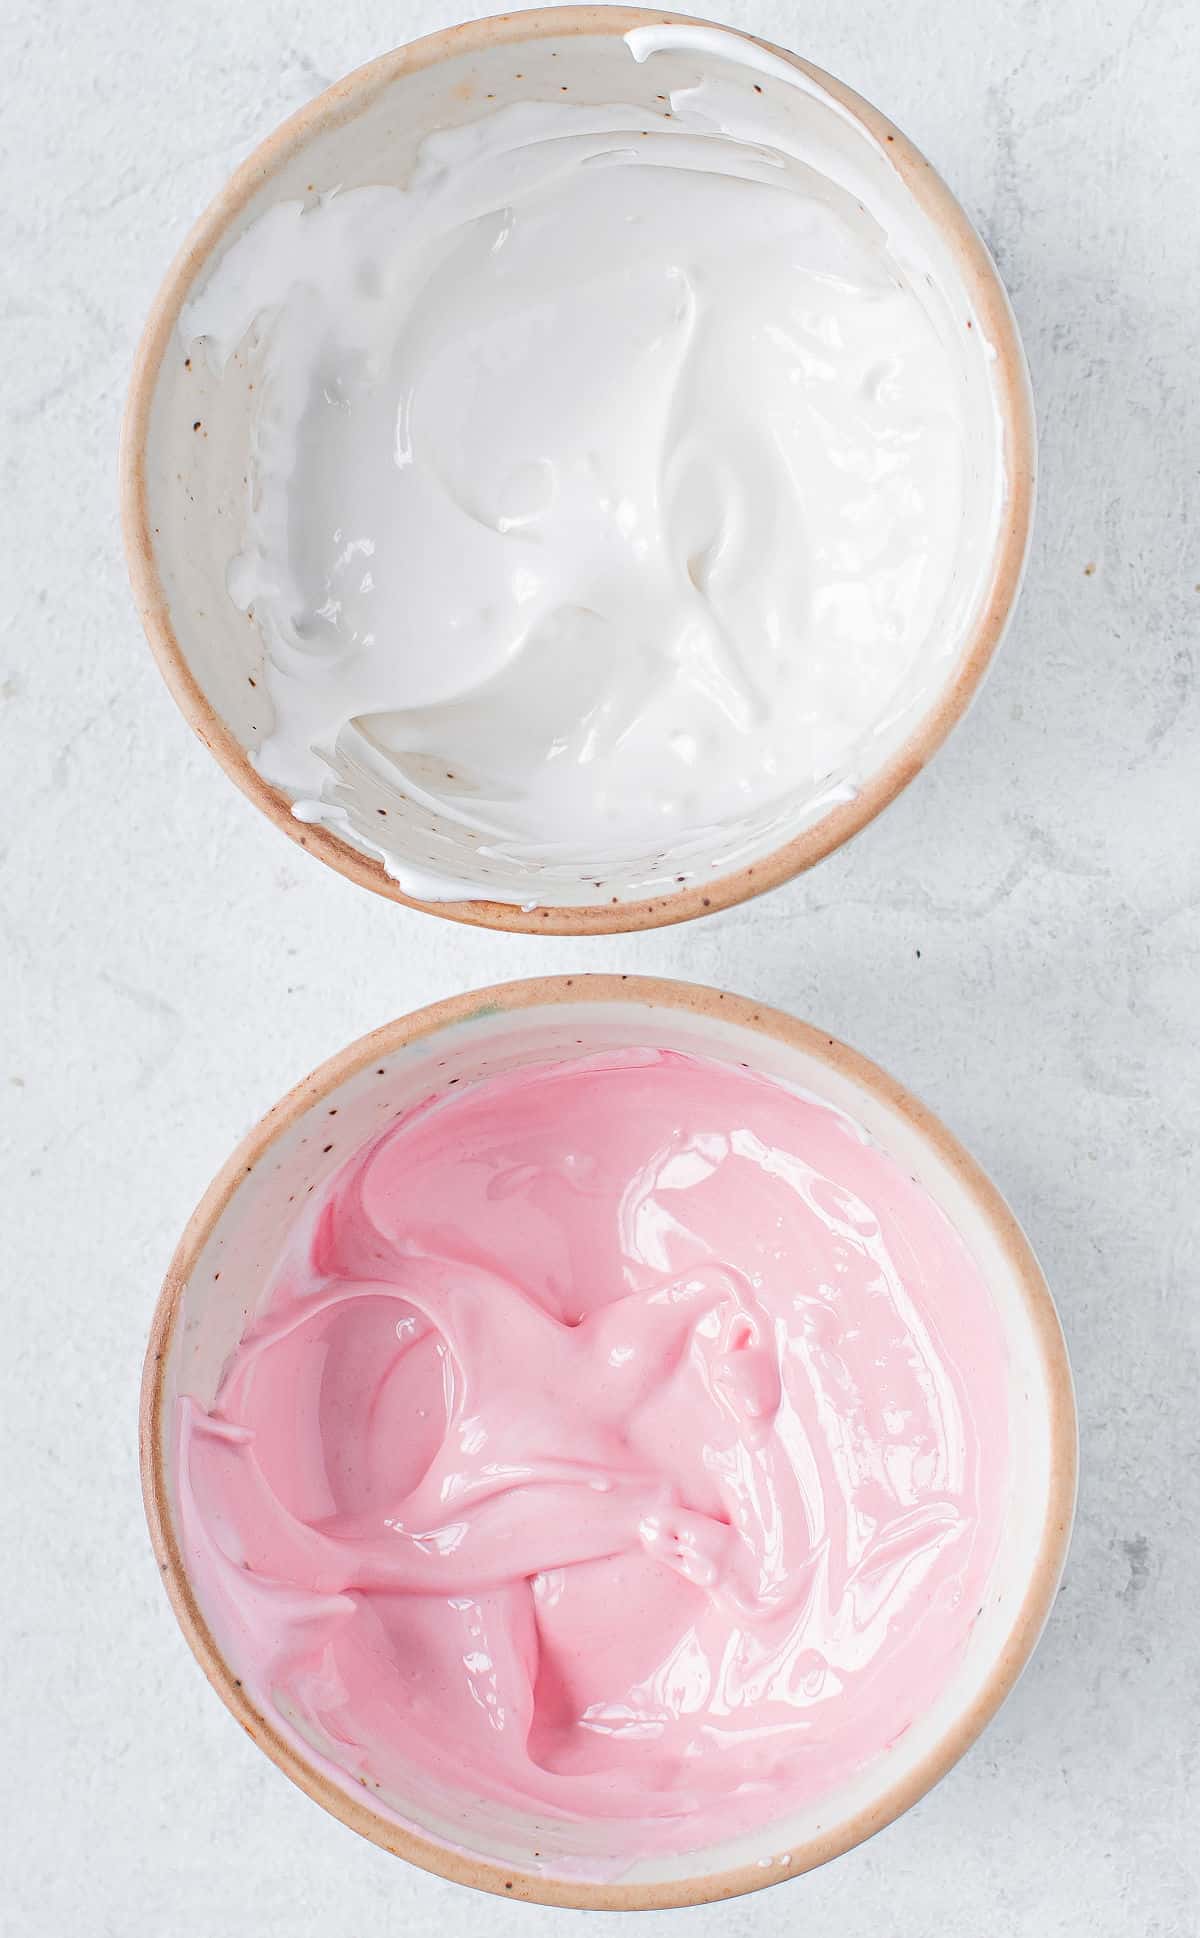 Royal icing tinted pink and white in separate bowls.